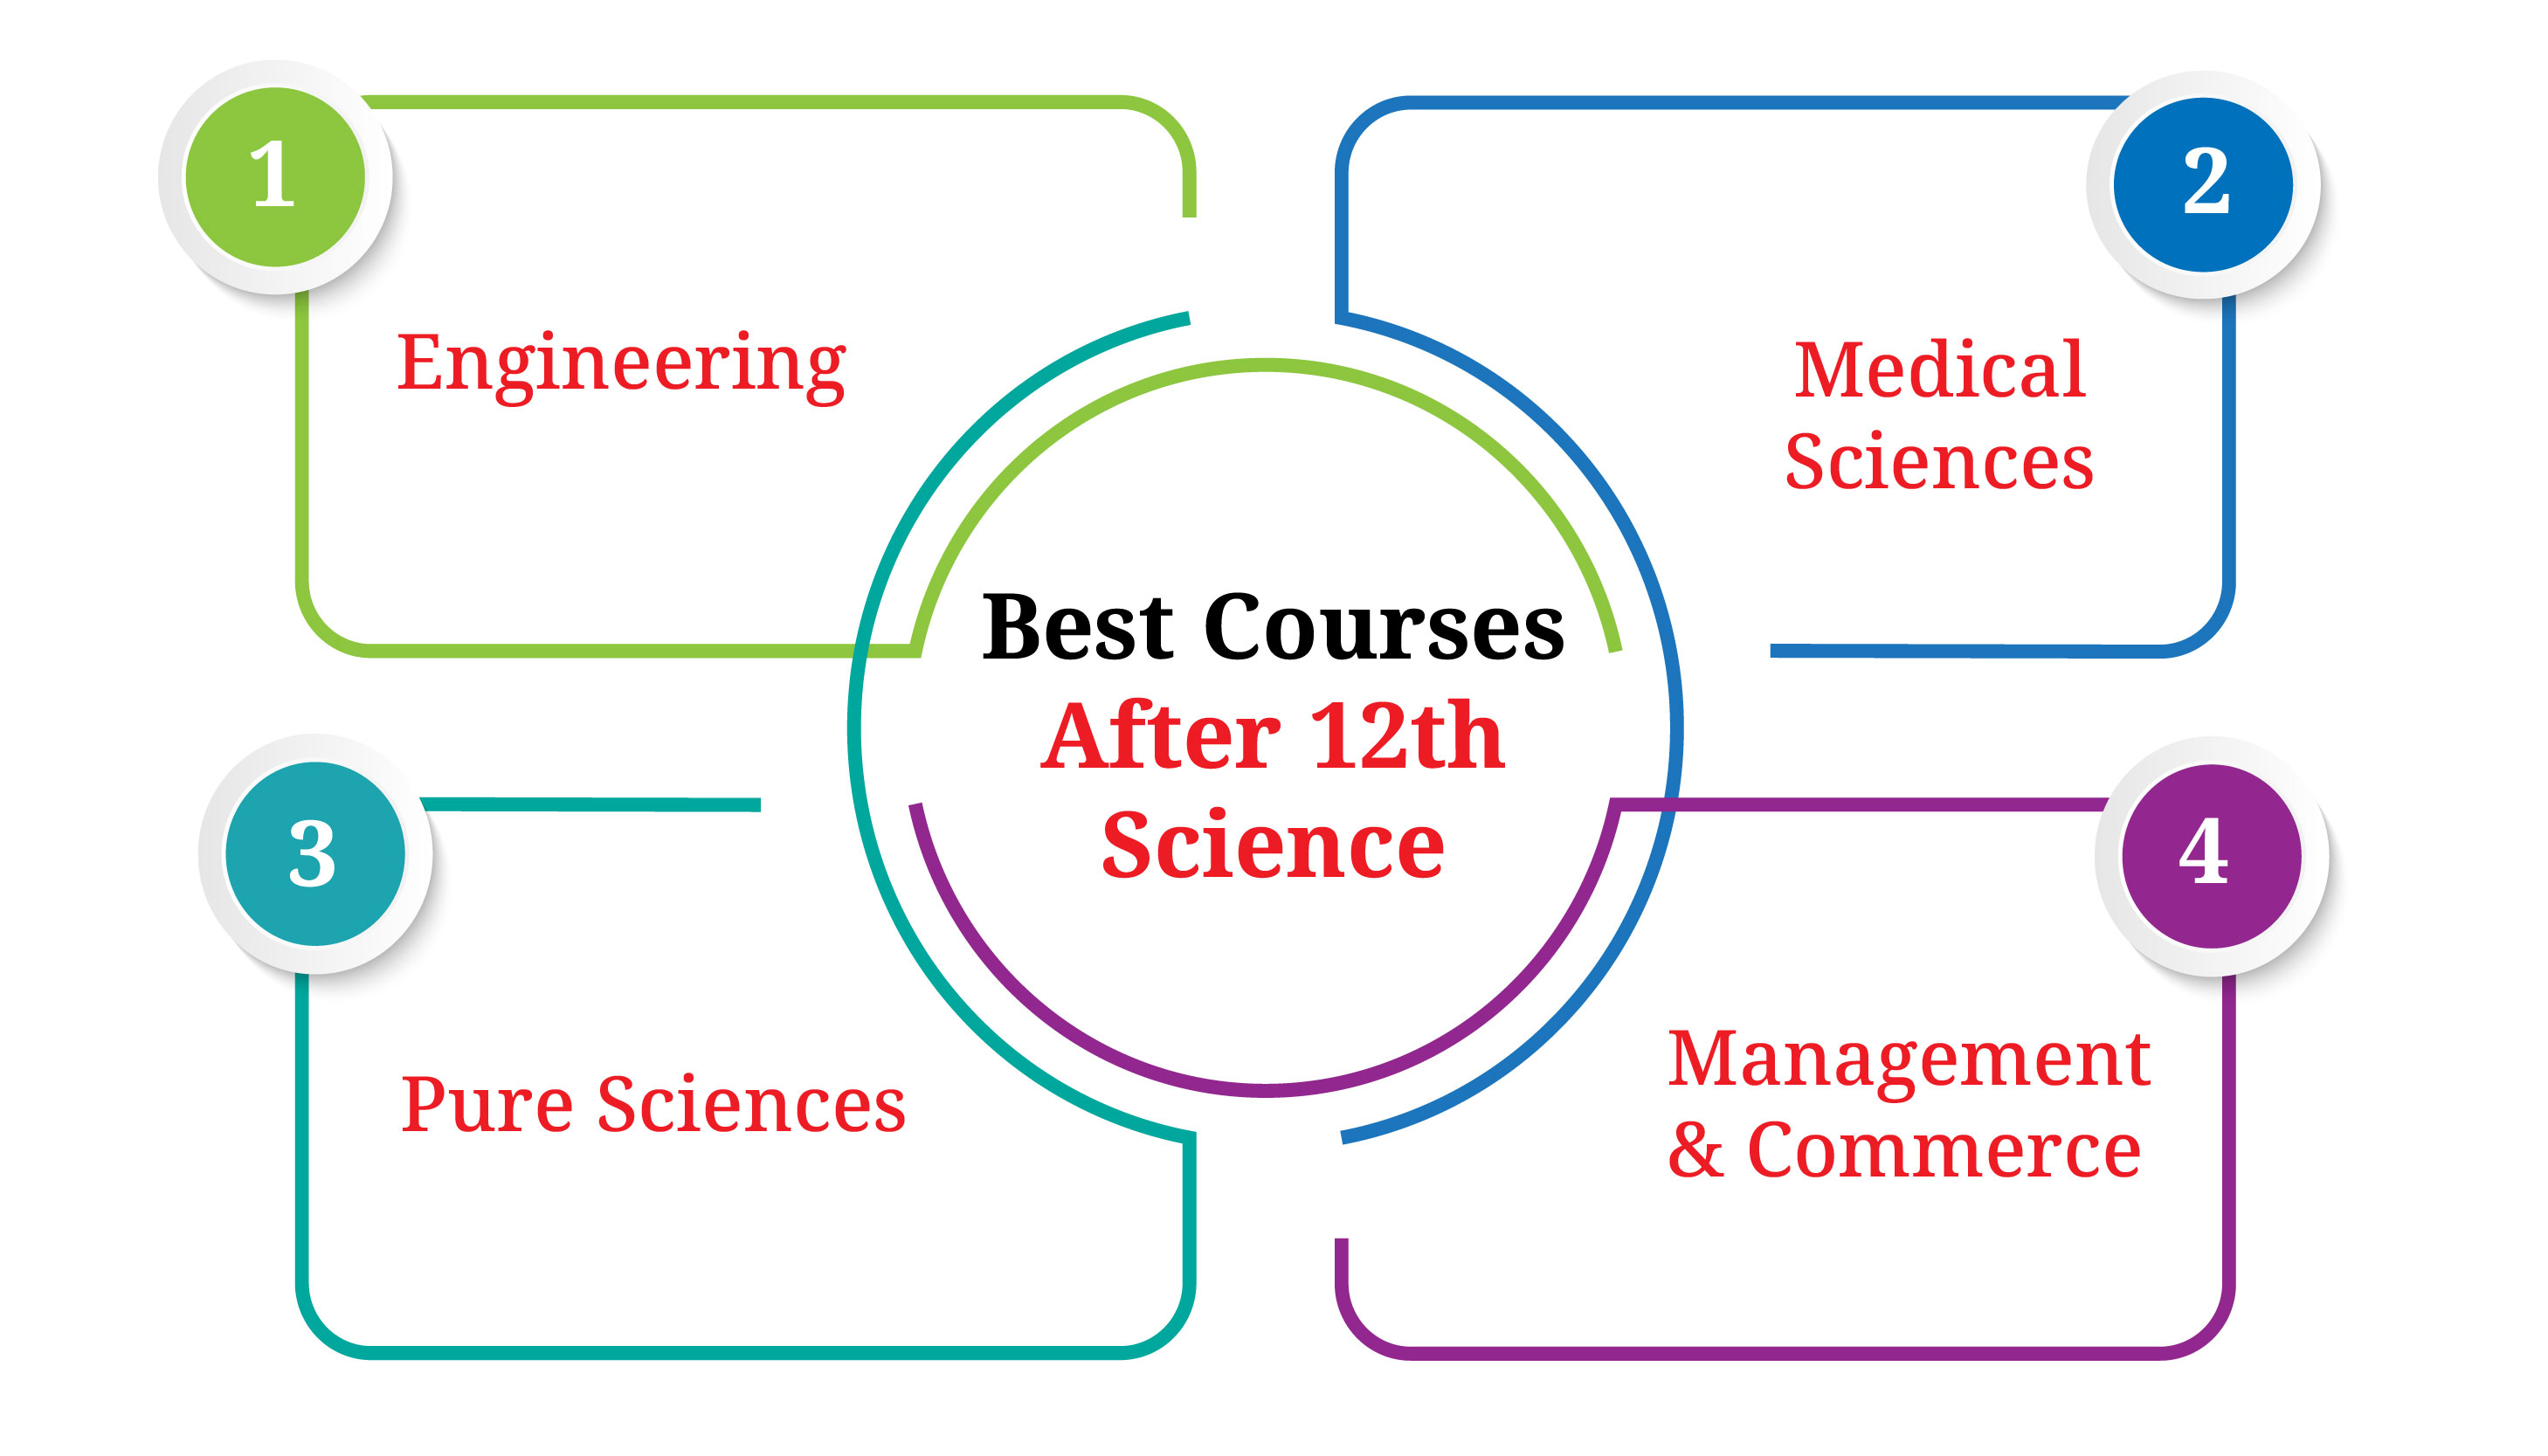 Best Courses After 12th Science